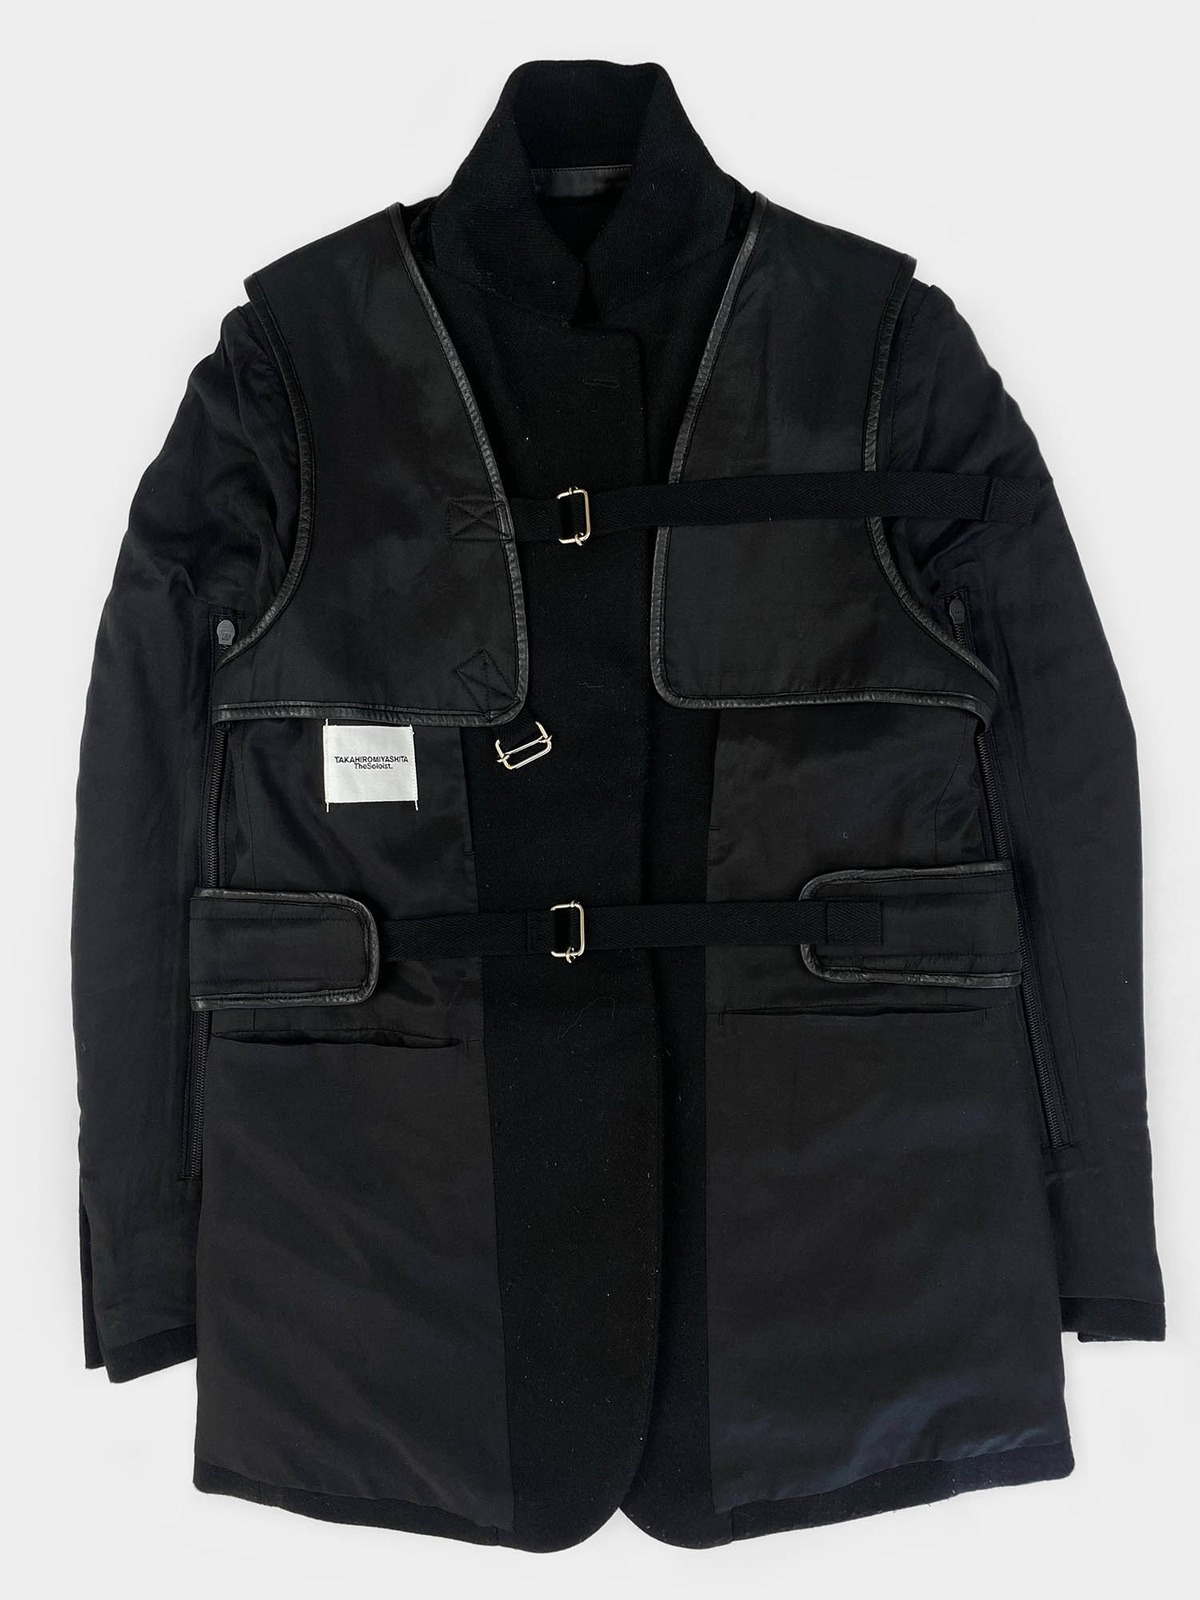 THE SOLOIST Harness Jacket AW2018 - ARCHIVED